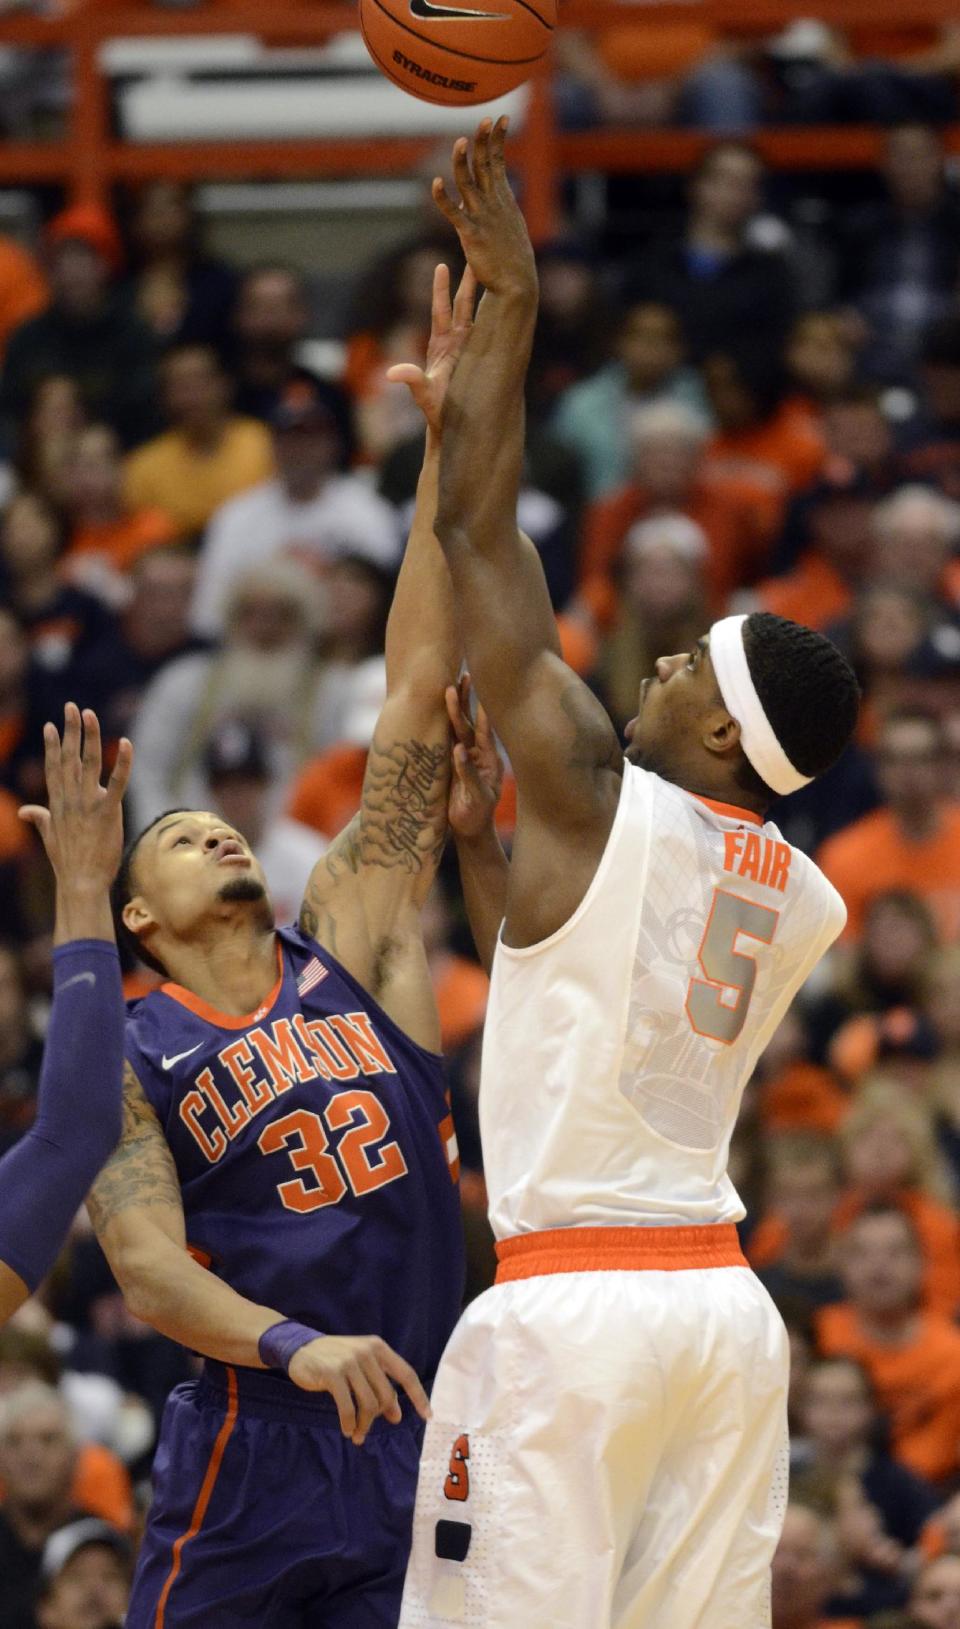 CORRECTS TO CLEMSON'S K.J. MCDANIELS NOT JARON BLOSSOMGAME - Syracuse's C.J. Fair, right, shoots over Clemson's K.J. McDaniels during the first half of an NCAA college basketball game in Syracuse, N.Y., Sunday, Feb. 9, 2014. (AP Photo/Kevin Rivoli)